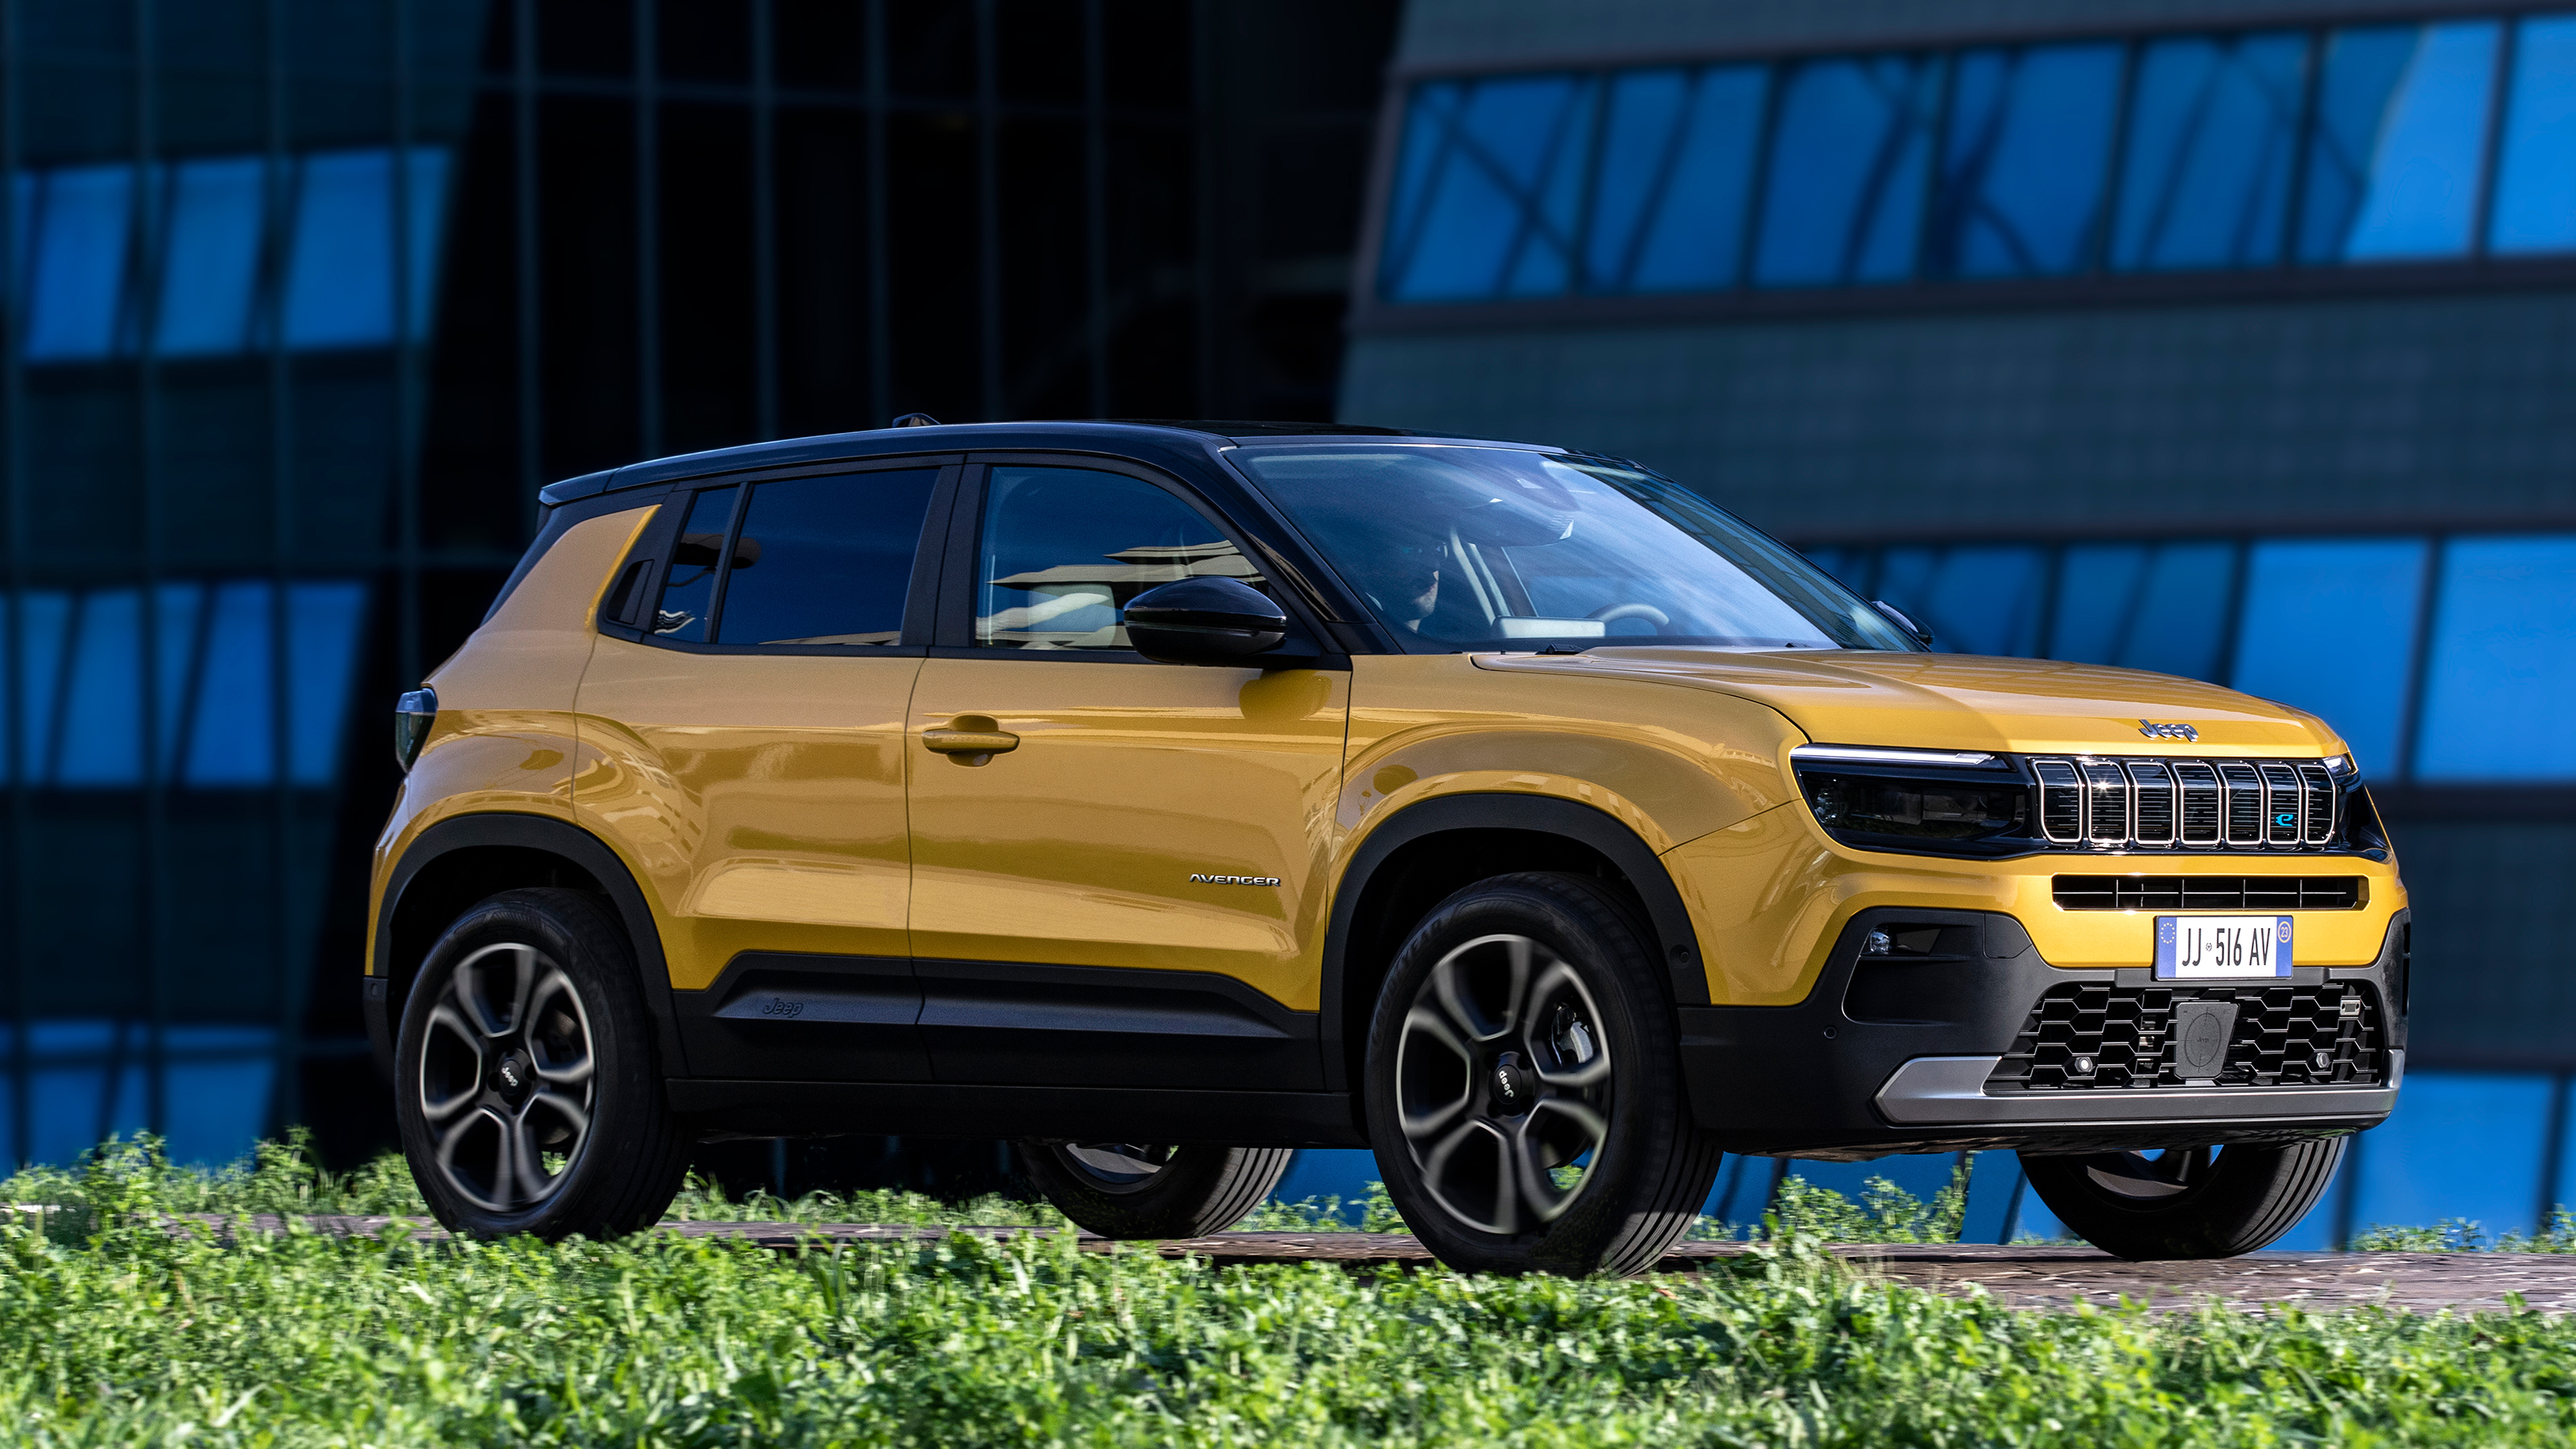 New Jeep Avenger electric SUV: prices, specs, range and first-look video